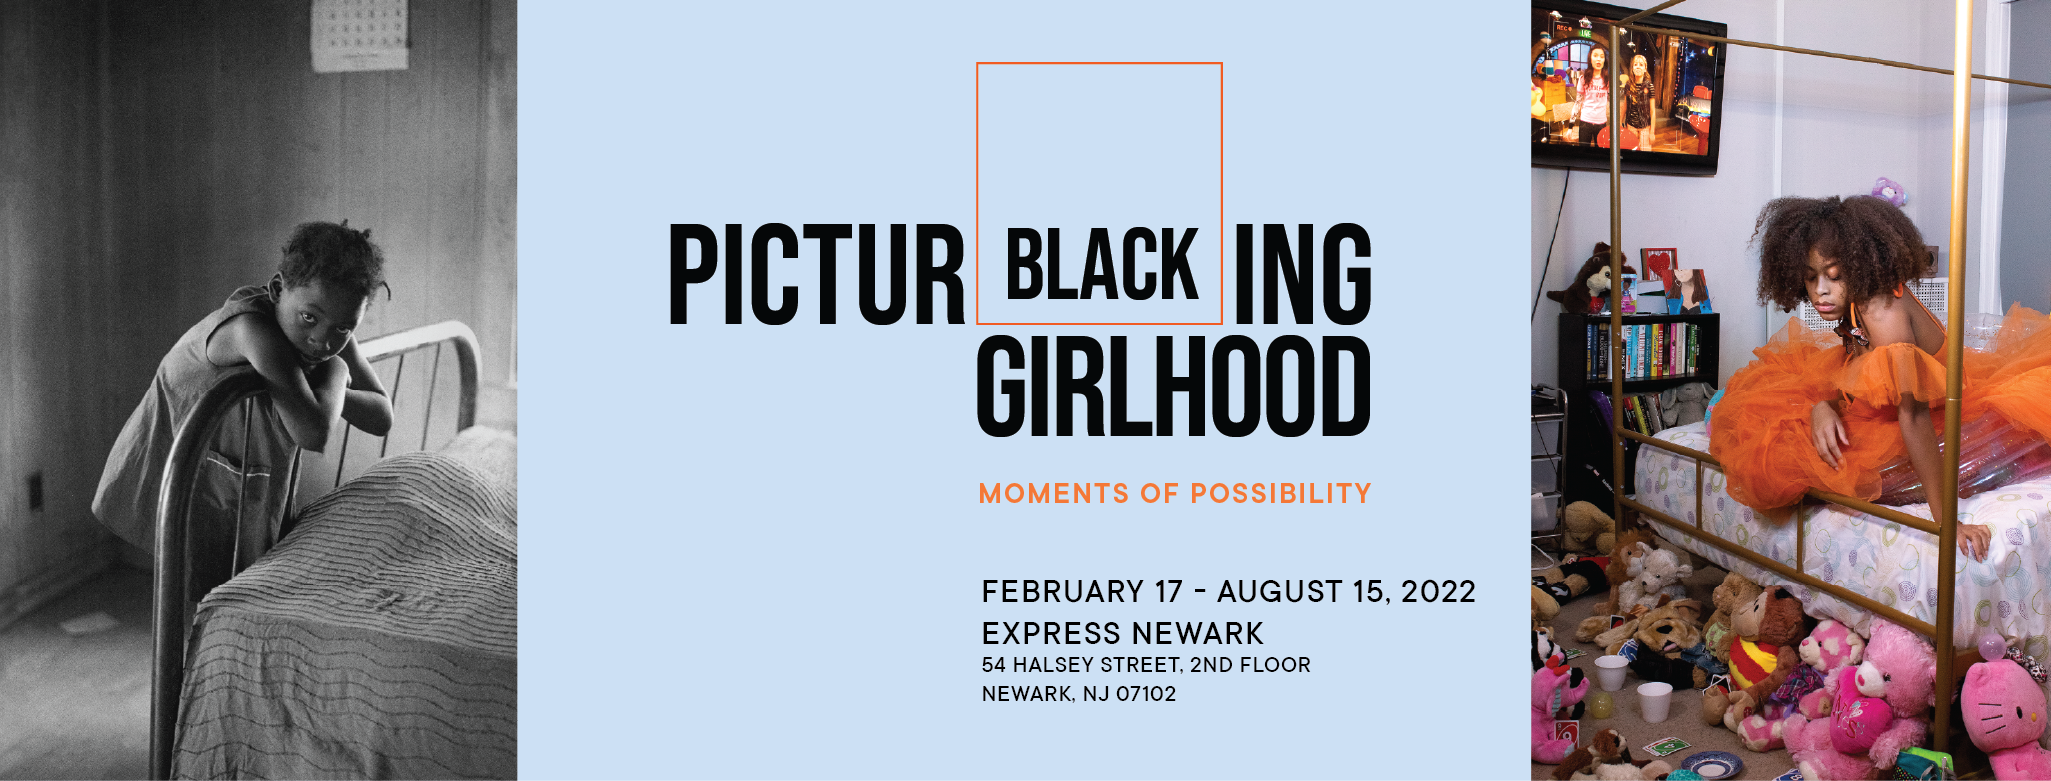 Picturing Black Girlhood: Moments of Possibility